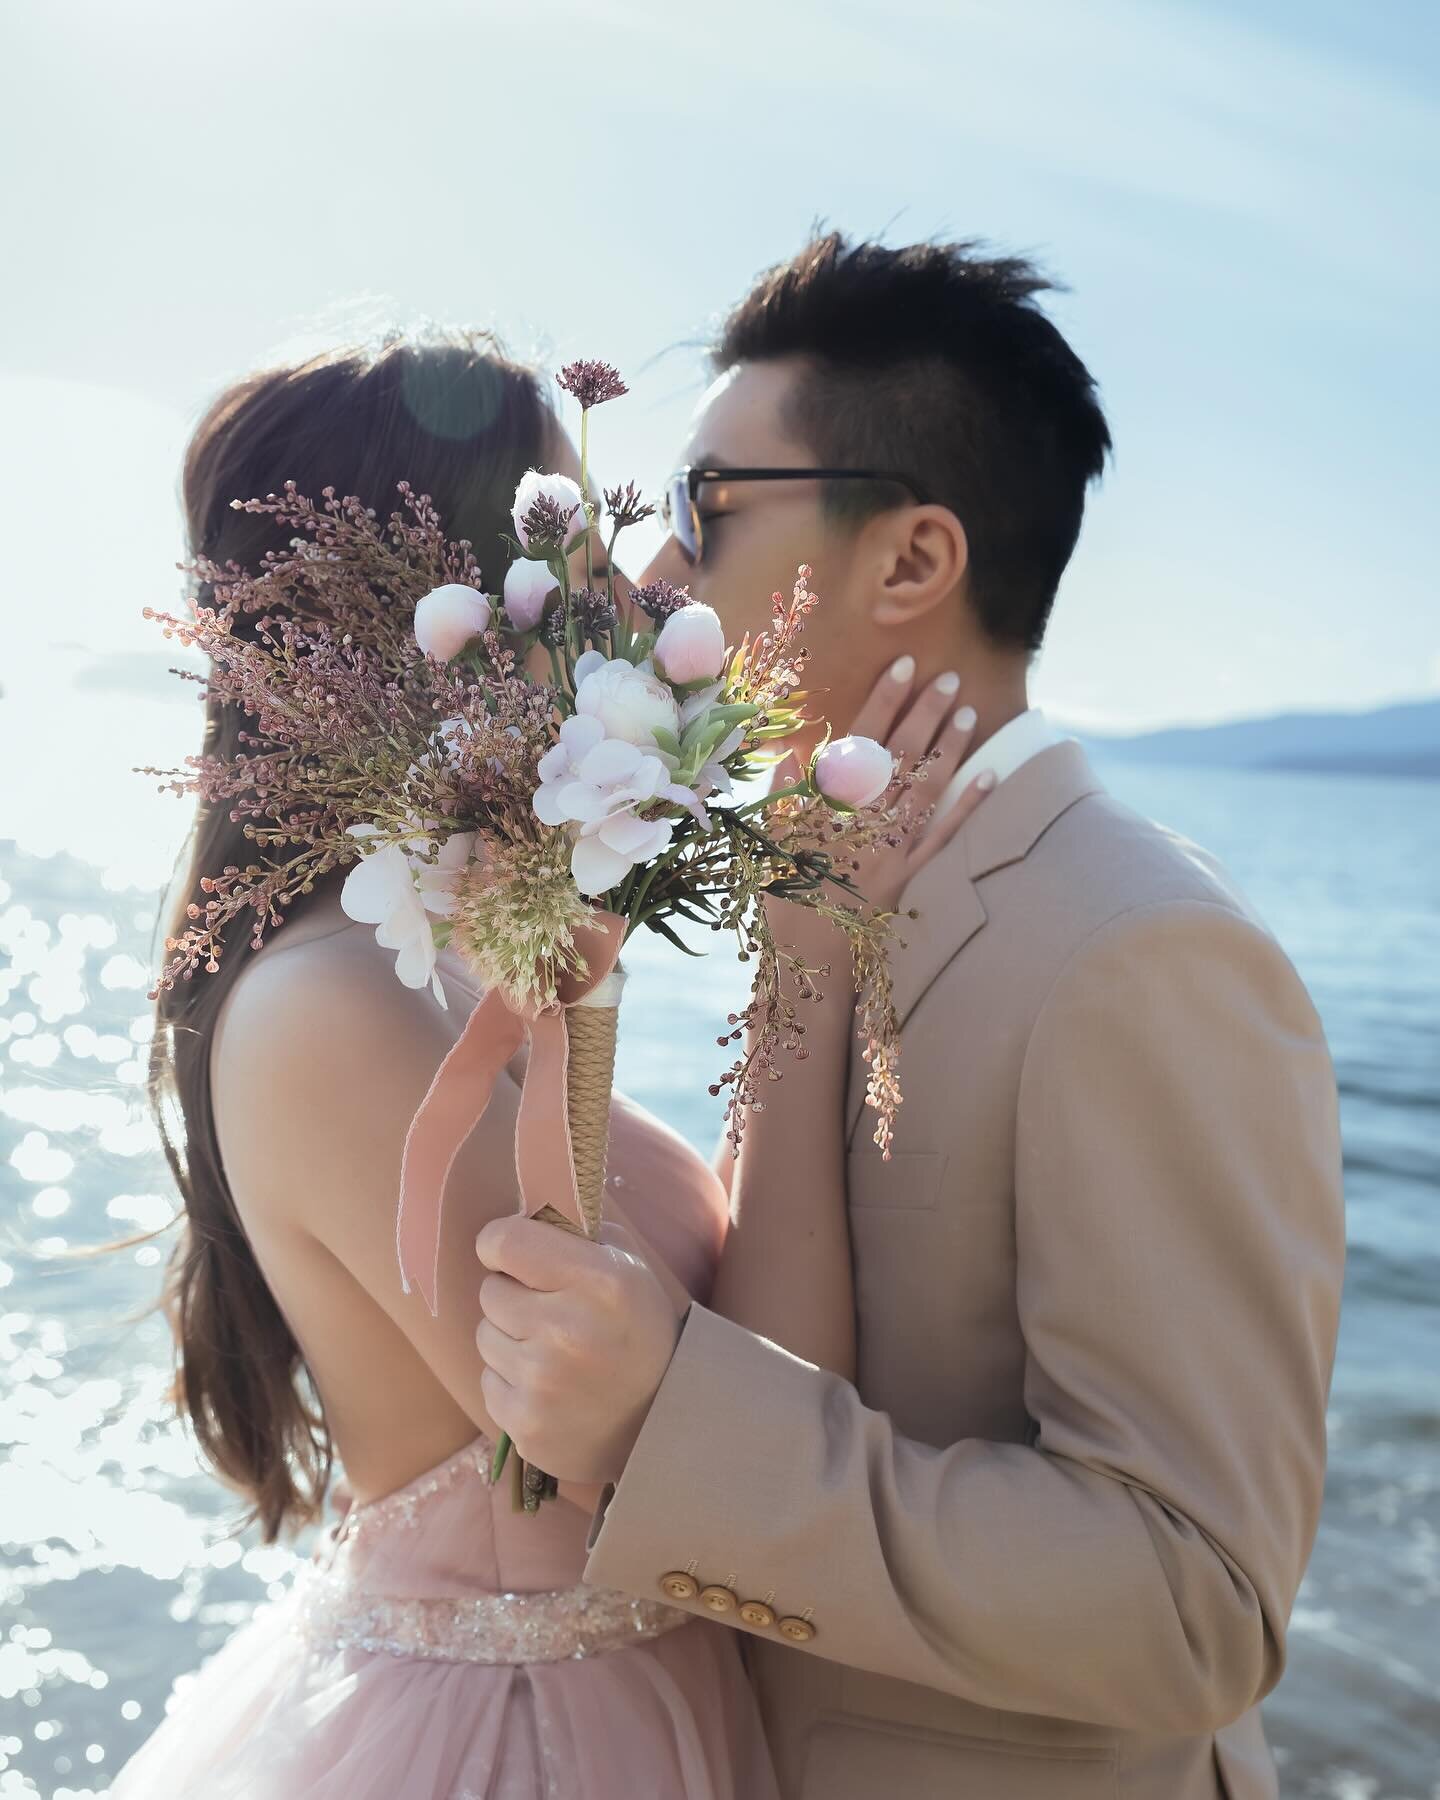 🌊☀️ Capturing Love by the Sea 📸 

Today&rsquo;s post features a sweet and romantic moment captured at the sunny shores of Vancouver. The clear blue skies and the natural charm of the couple make this photo truly special. 💕 For those seeking a natu